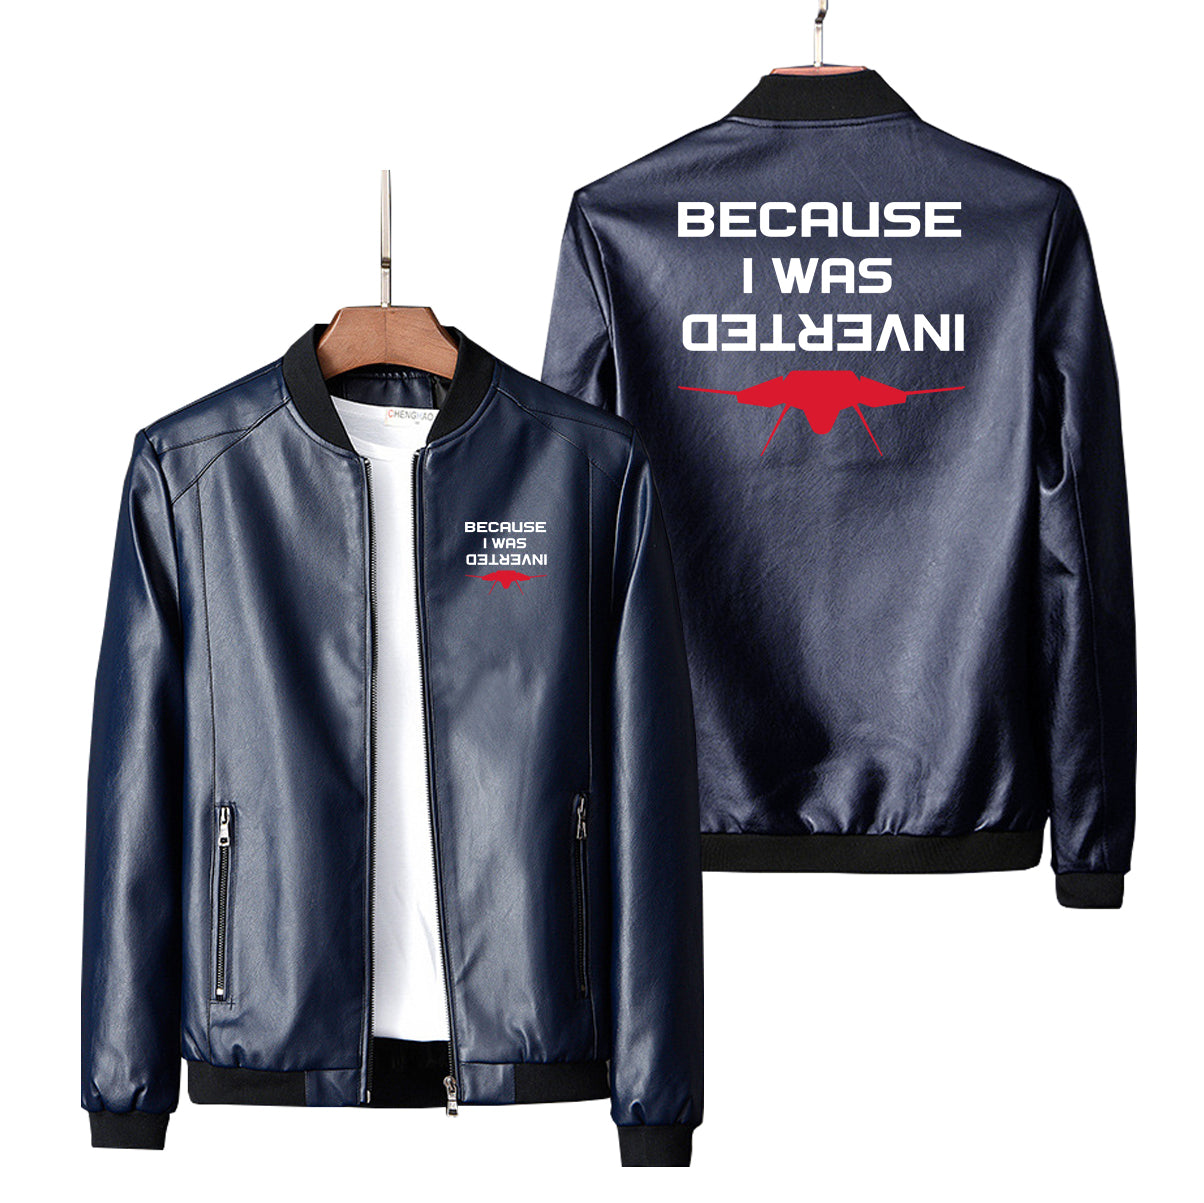 Because I was Inverted Designed PU Leather Jackets